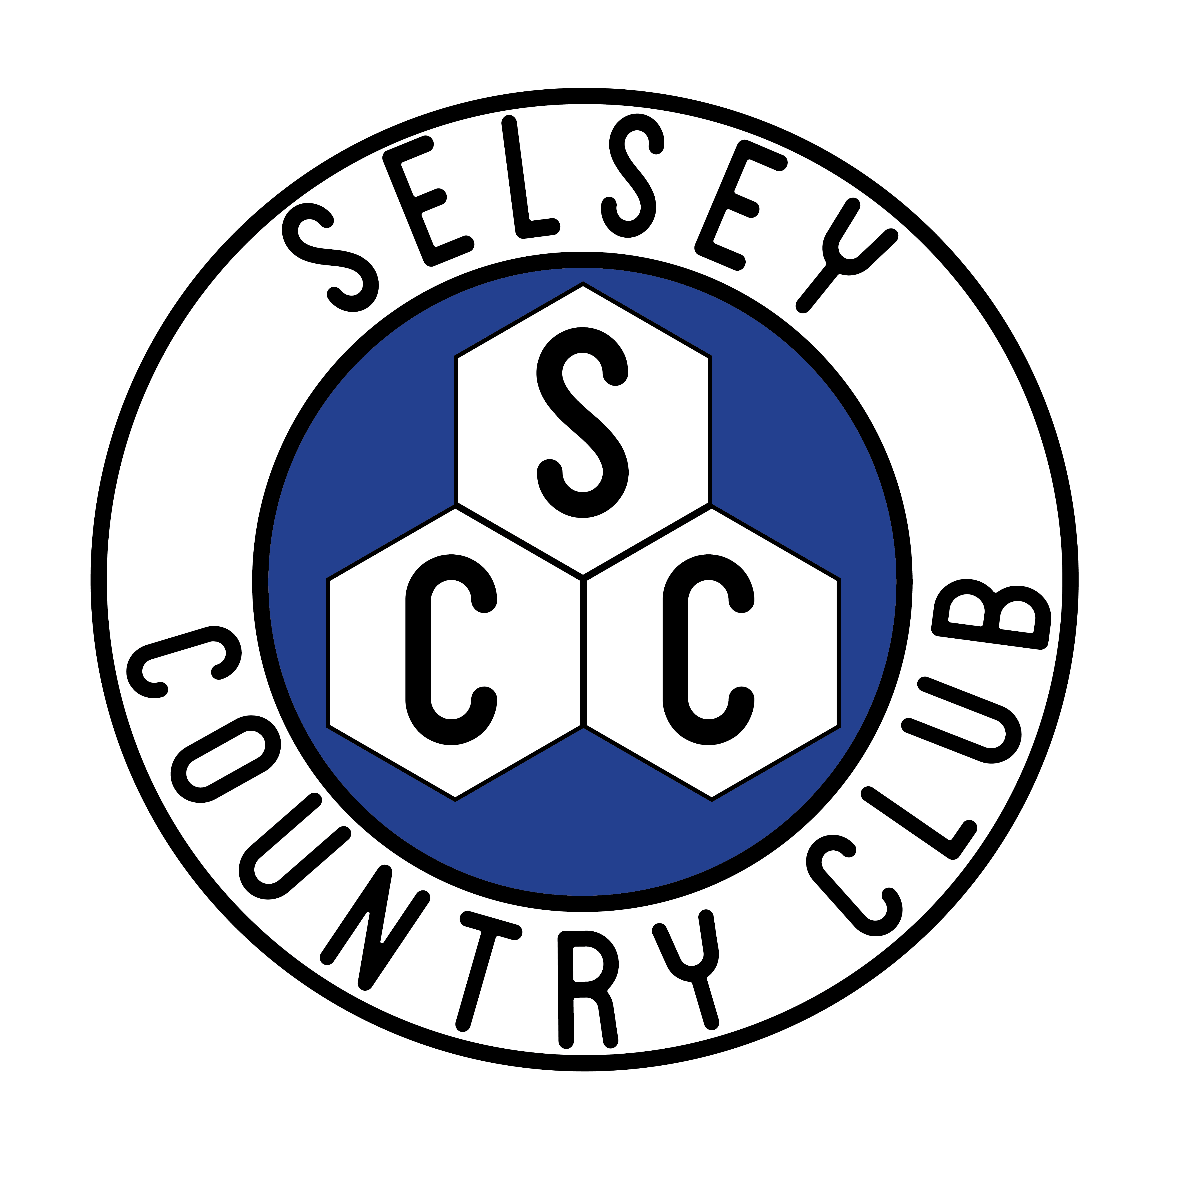 Selsey Country Club -Image-17